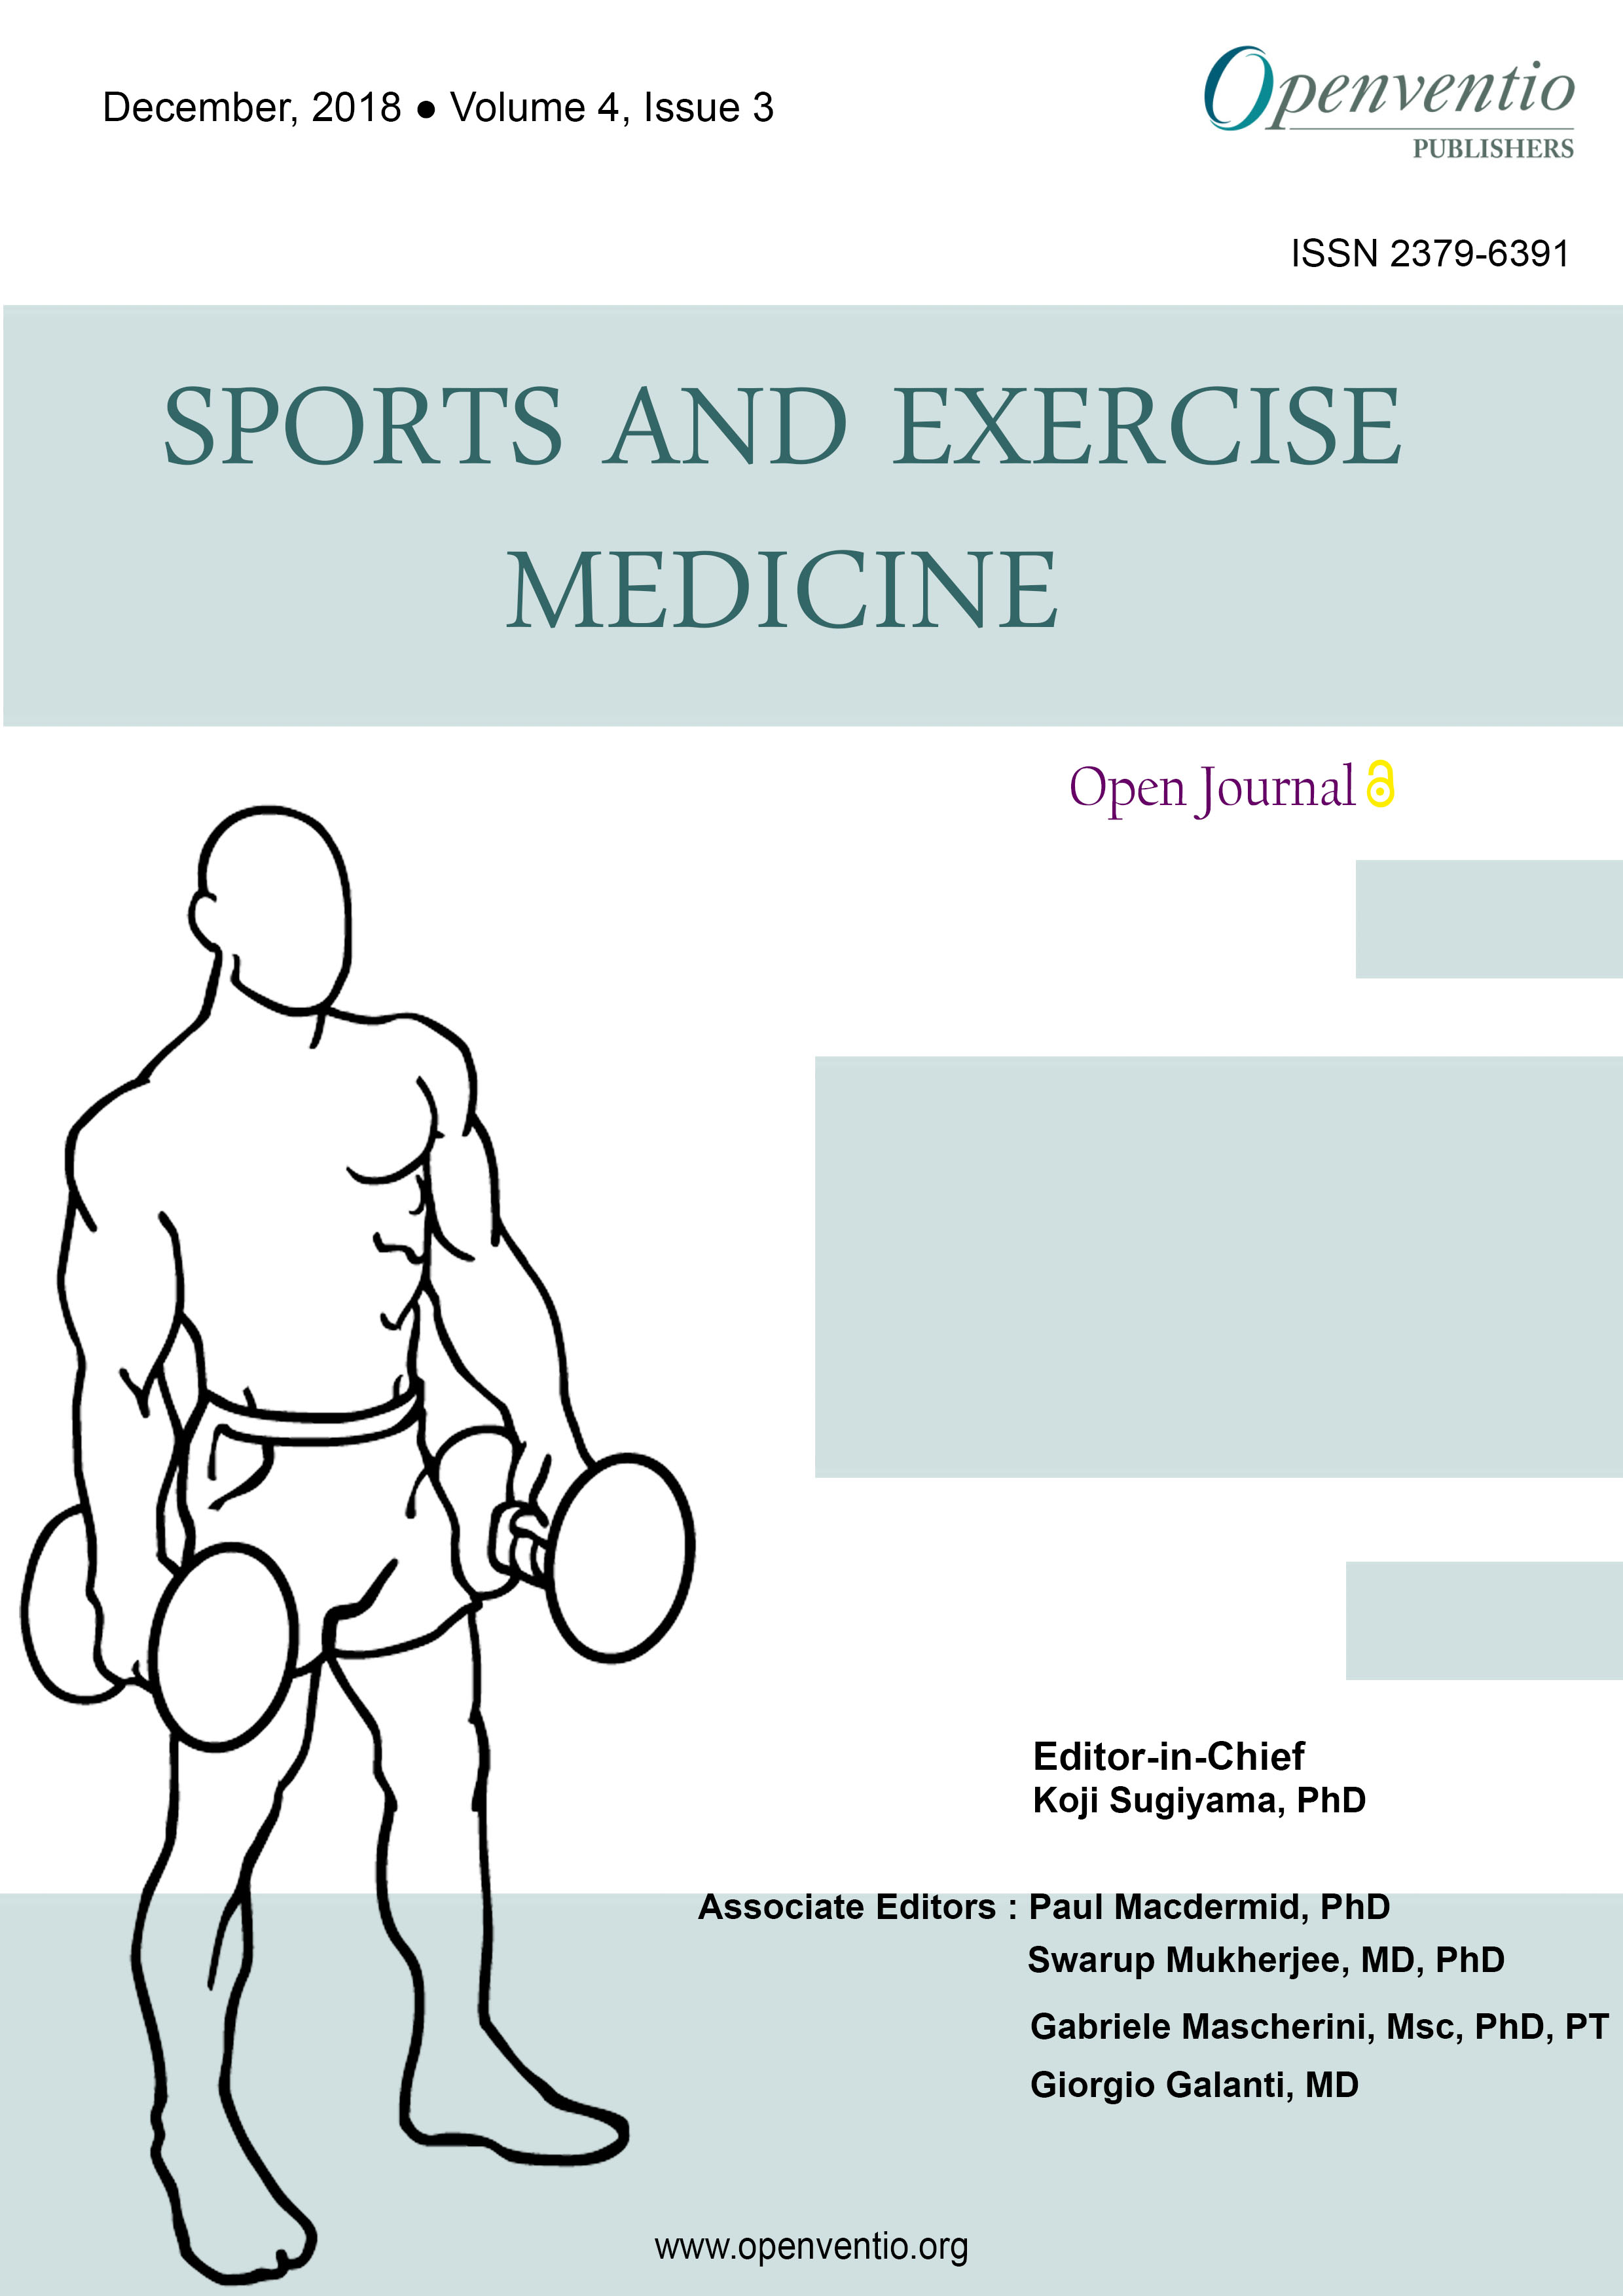 Sports And Exercise Medicine Open Journal Semoj Openventio Publishers